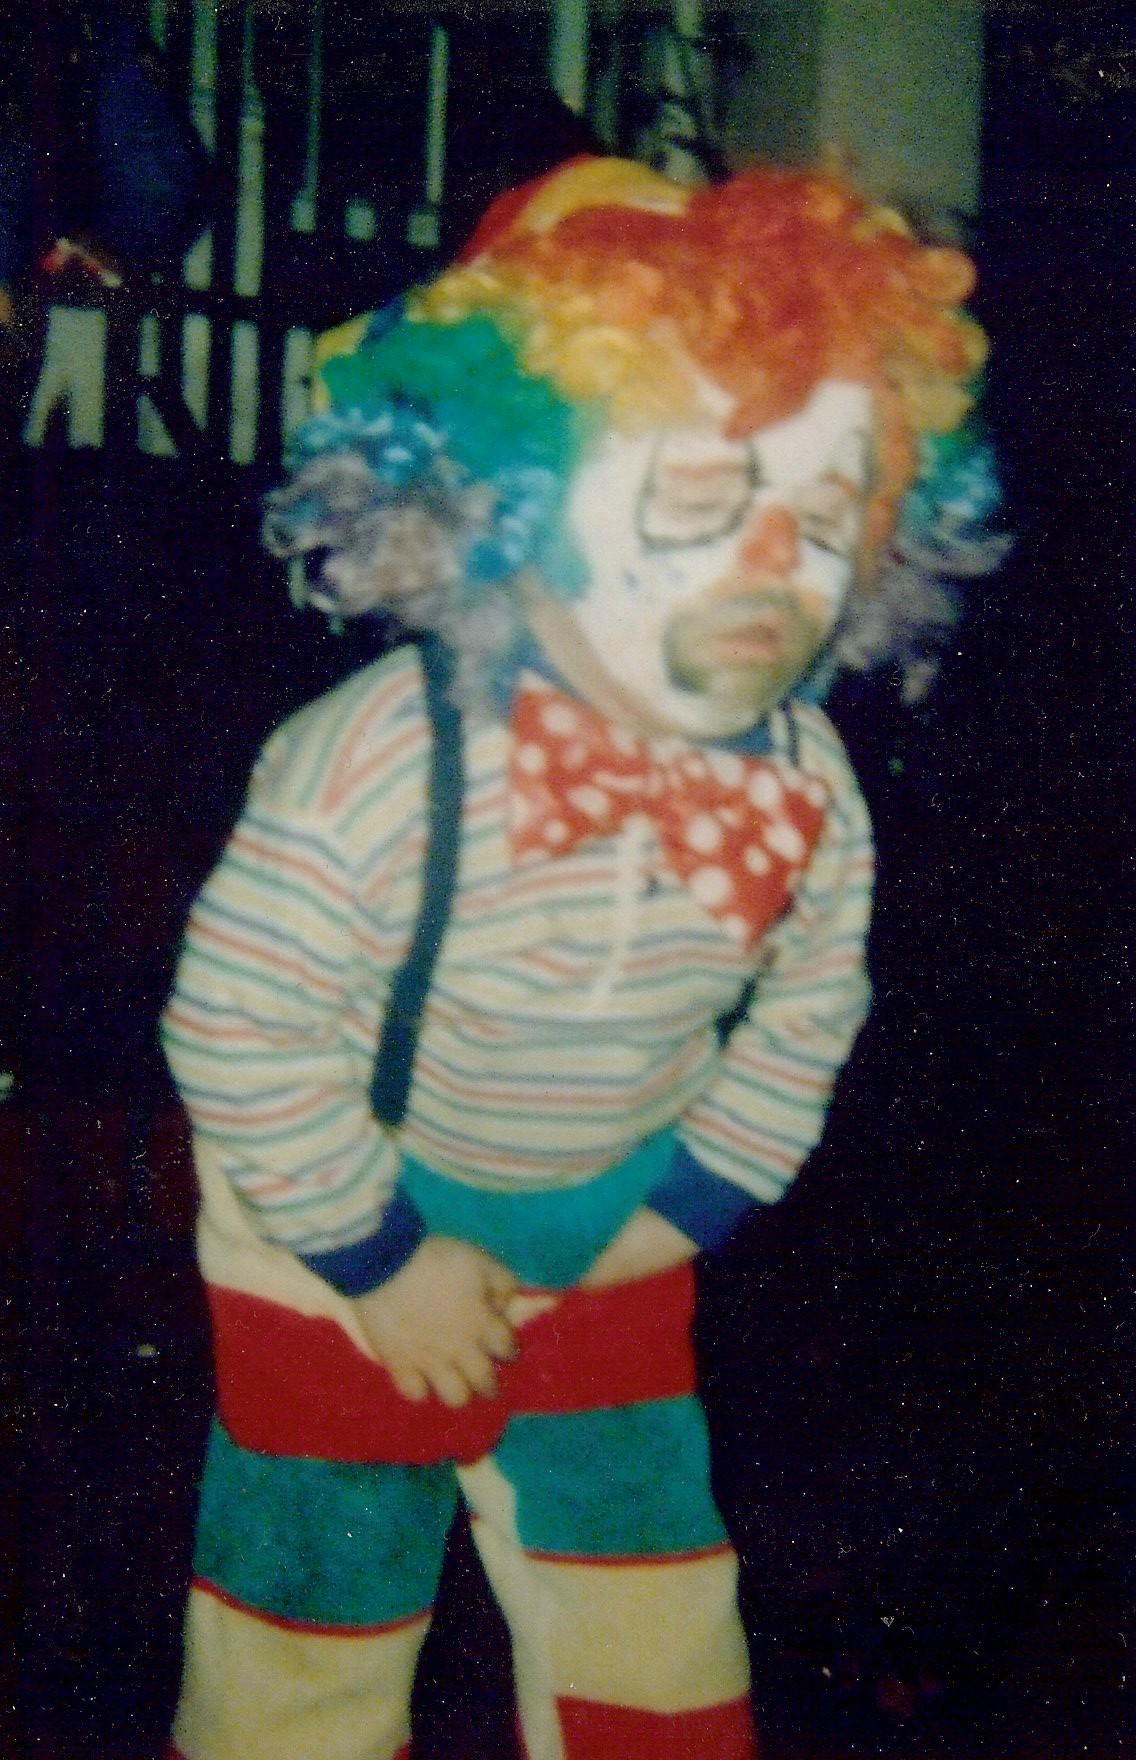 Too much candy on Halloween - Circa 1997